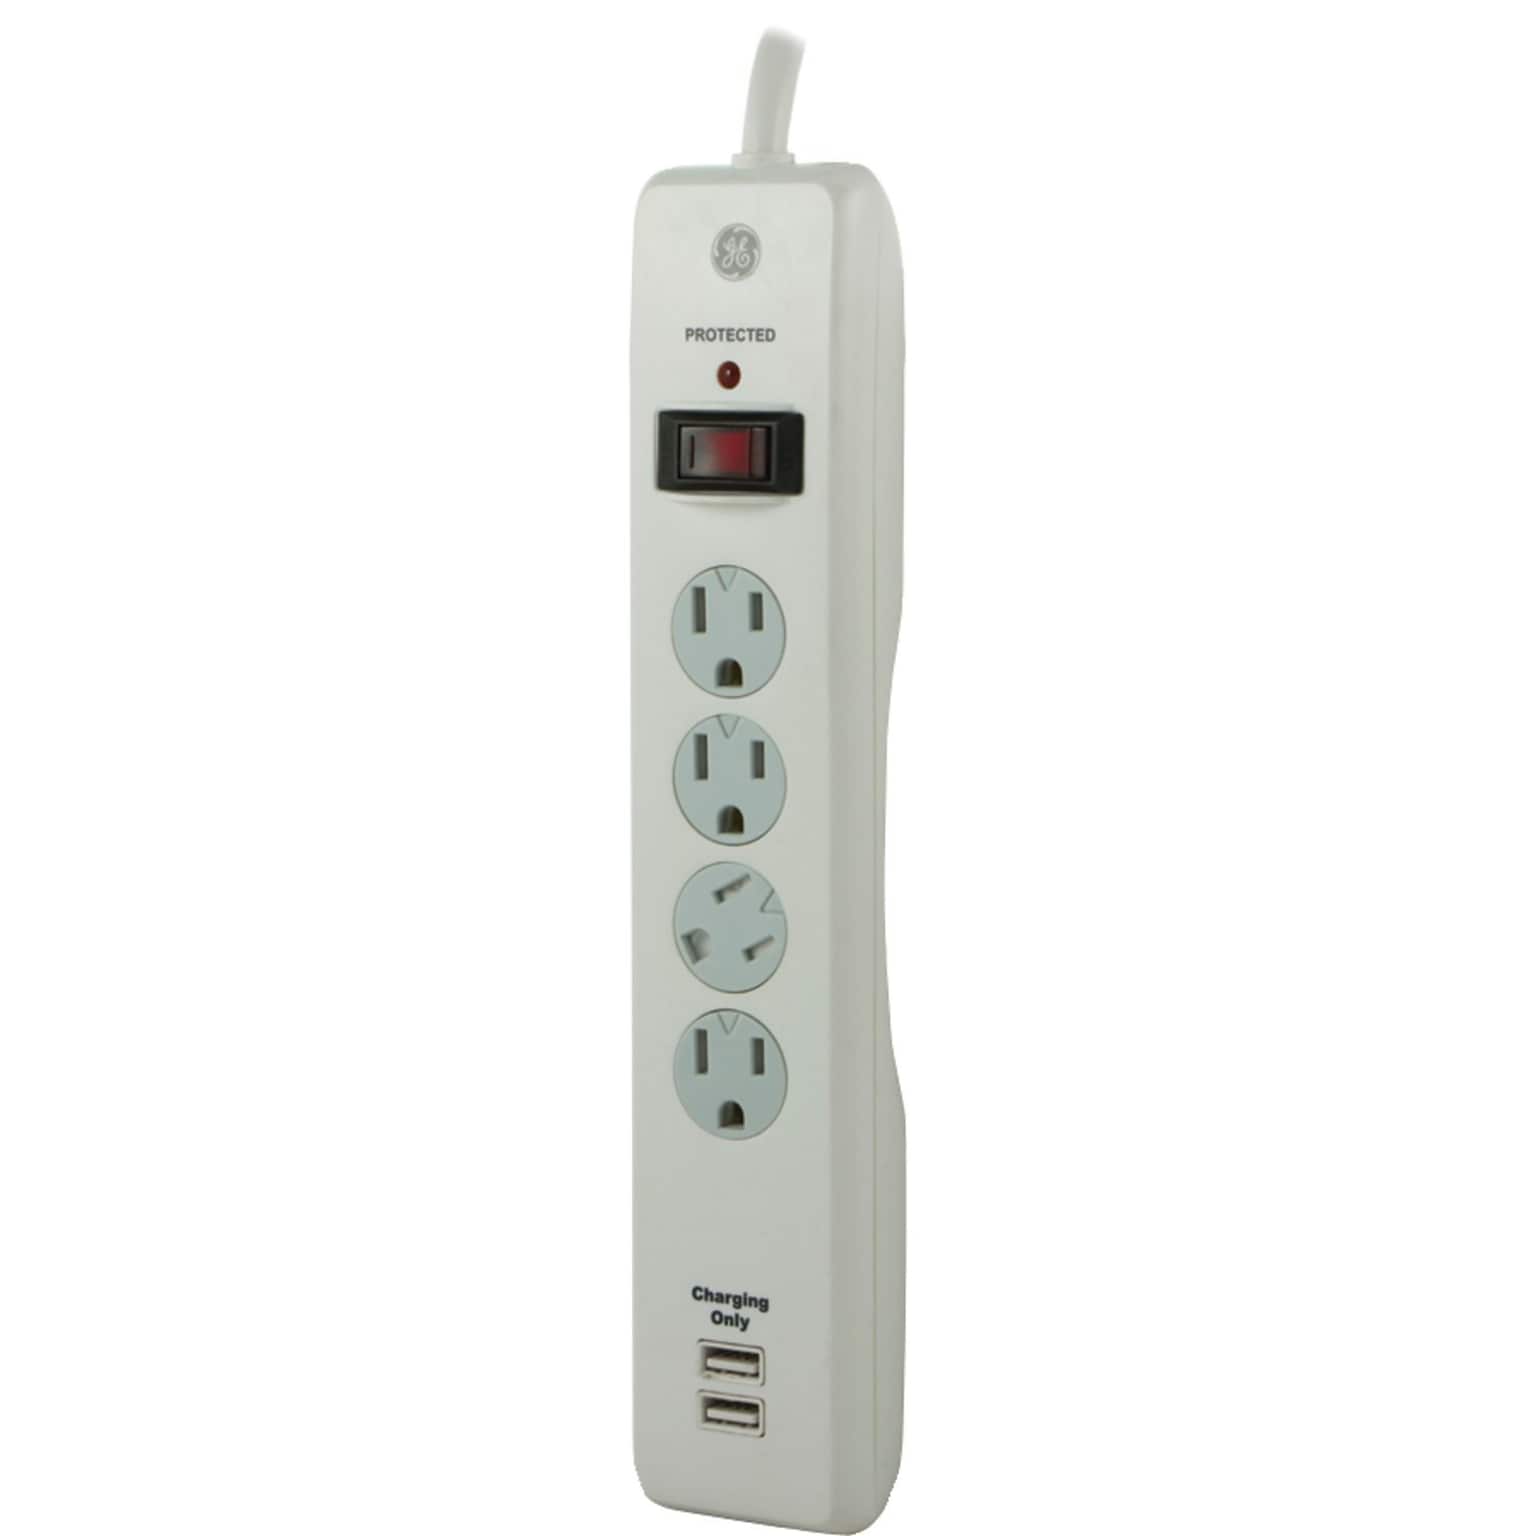 GE 4 Outlet Surge Protector, 3 Cord, 450 Joules (14090)